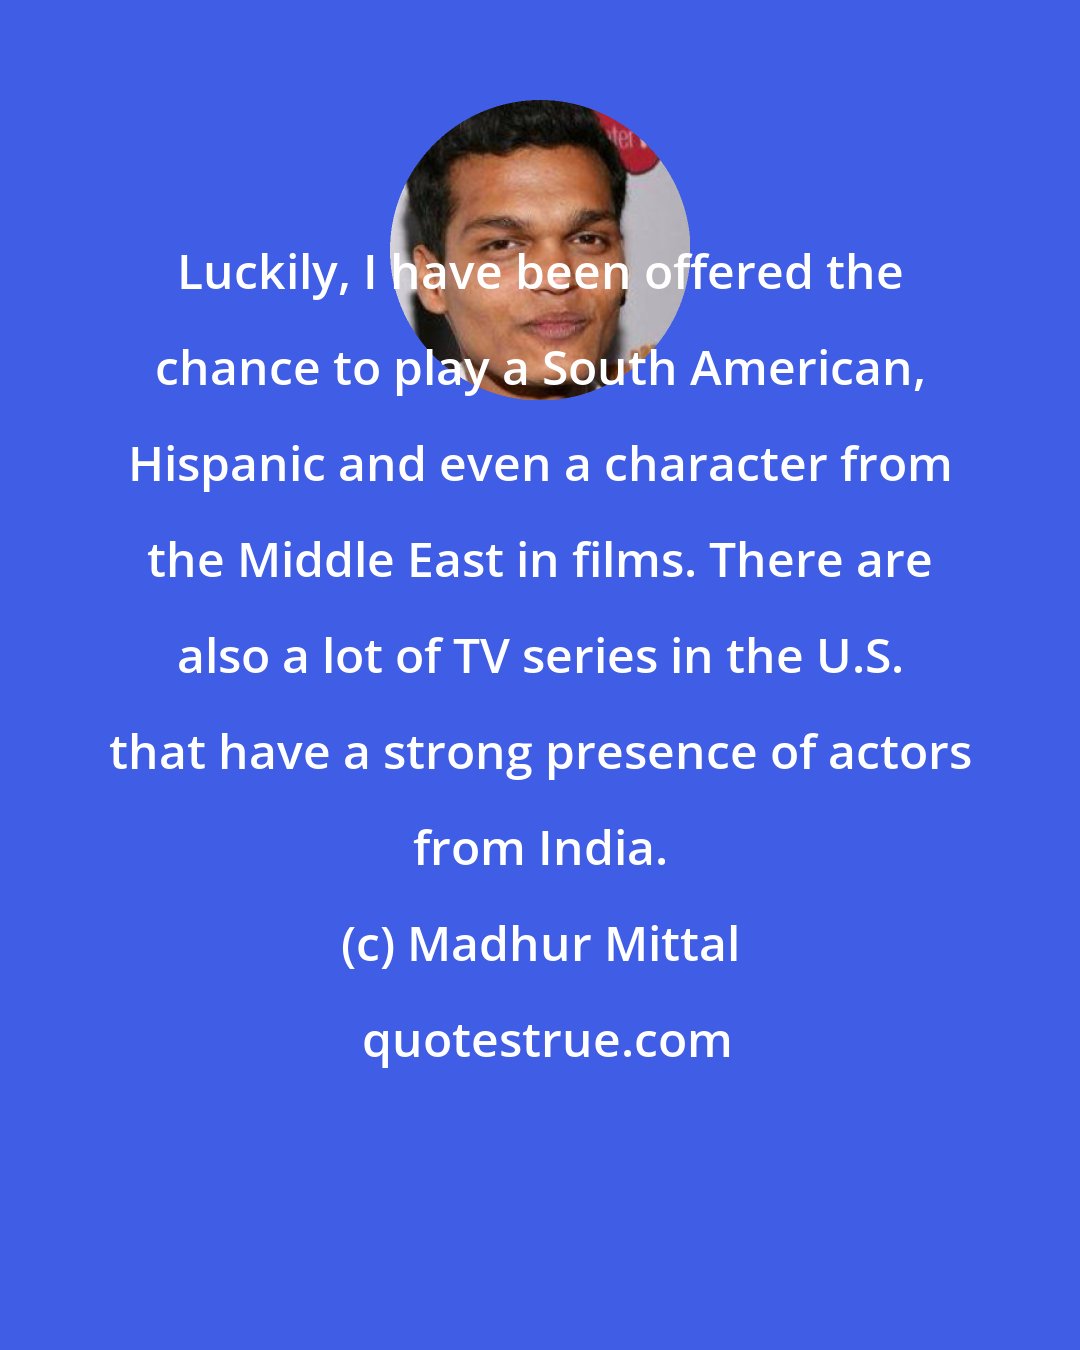 Madhur Mittal: Luckily, I have been offered the chance to play a South American, Hispanic and even a character from the Middle East in films. There are also a lot of TV series in the U.S. that have a strong presence of actors from India.